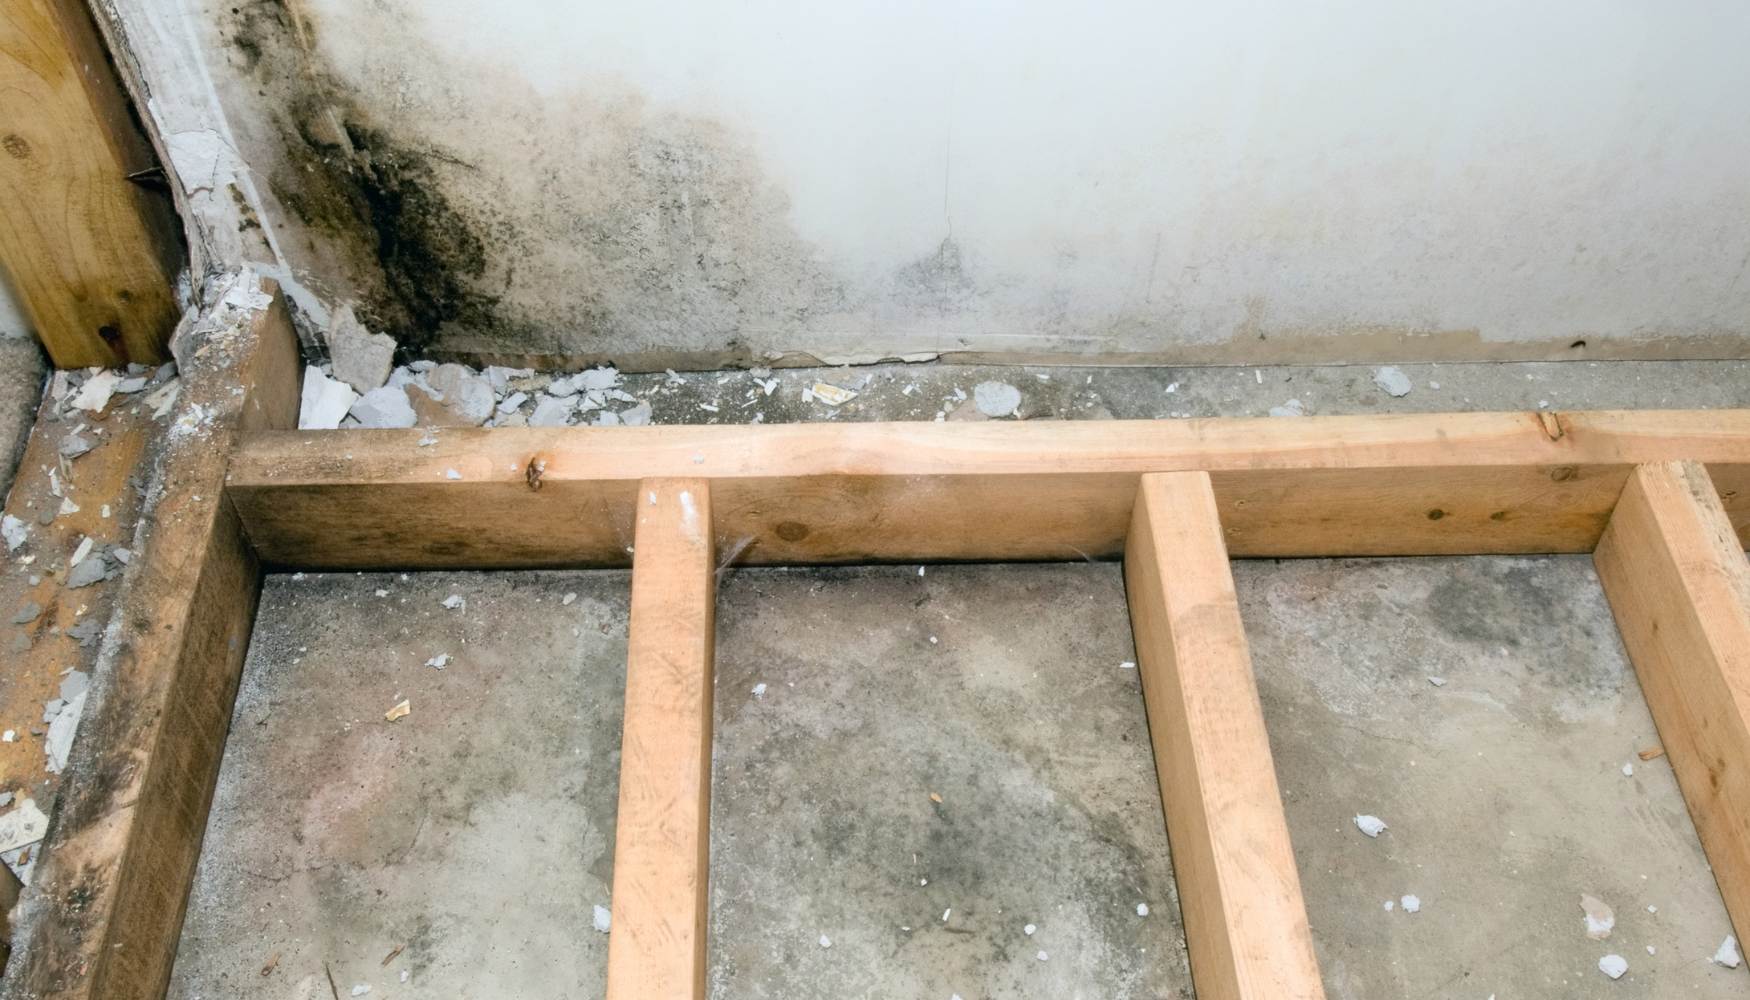 how to remove mold from basement wall